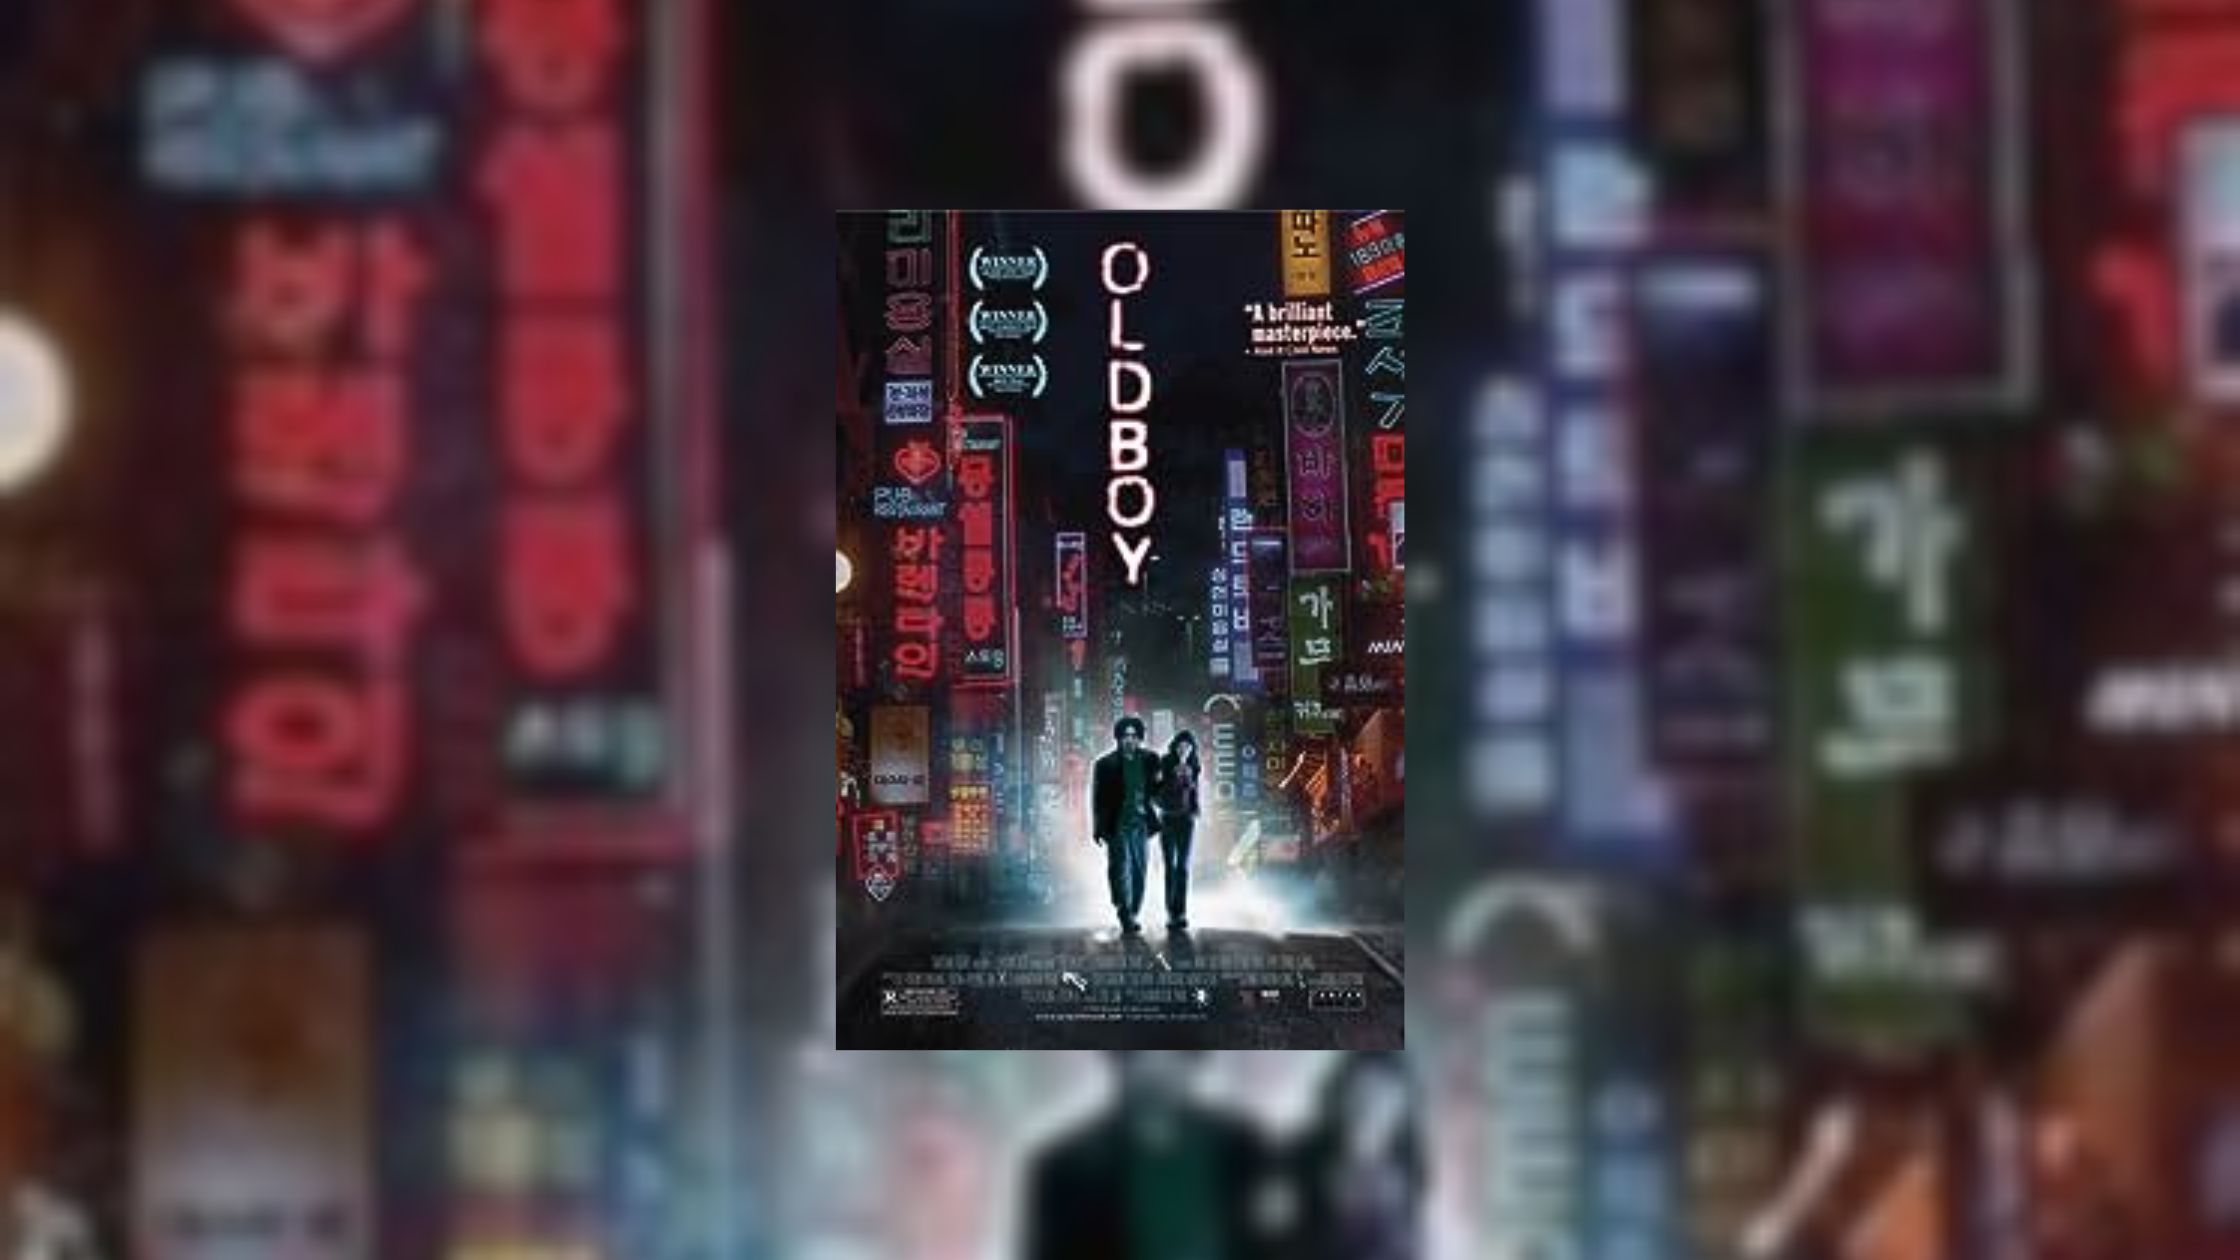 Poster of the film Oldboy released in 2003.